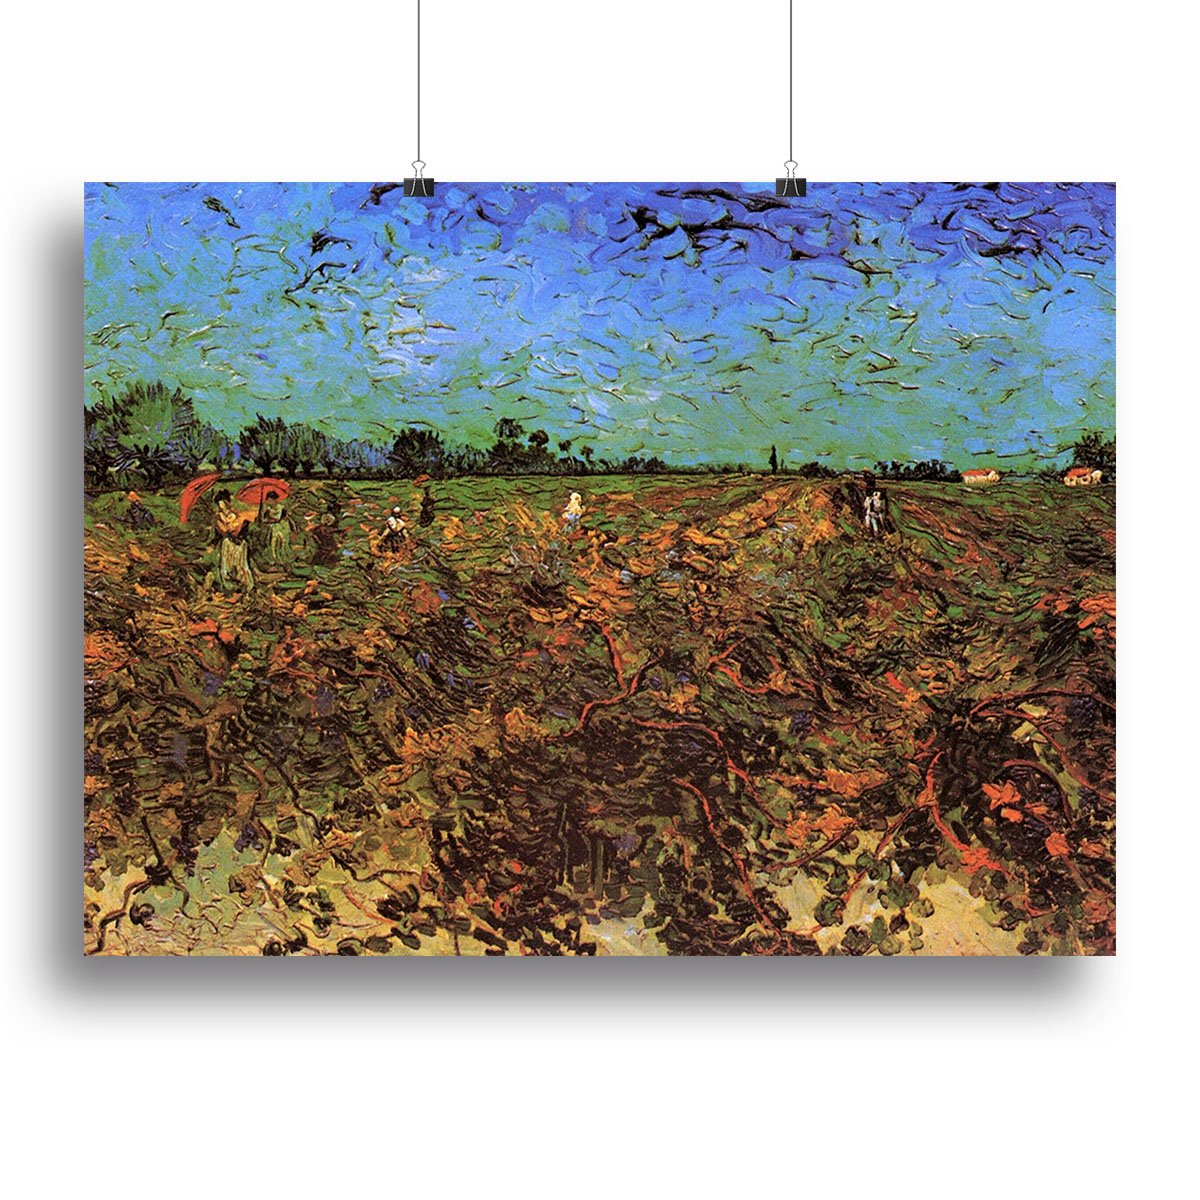 The Green Vineyard by Van Gogh Canvas Print or Poster